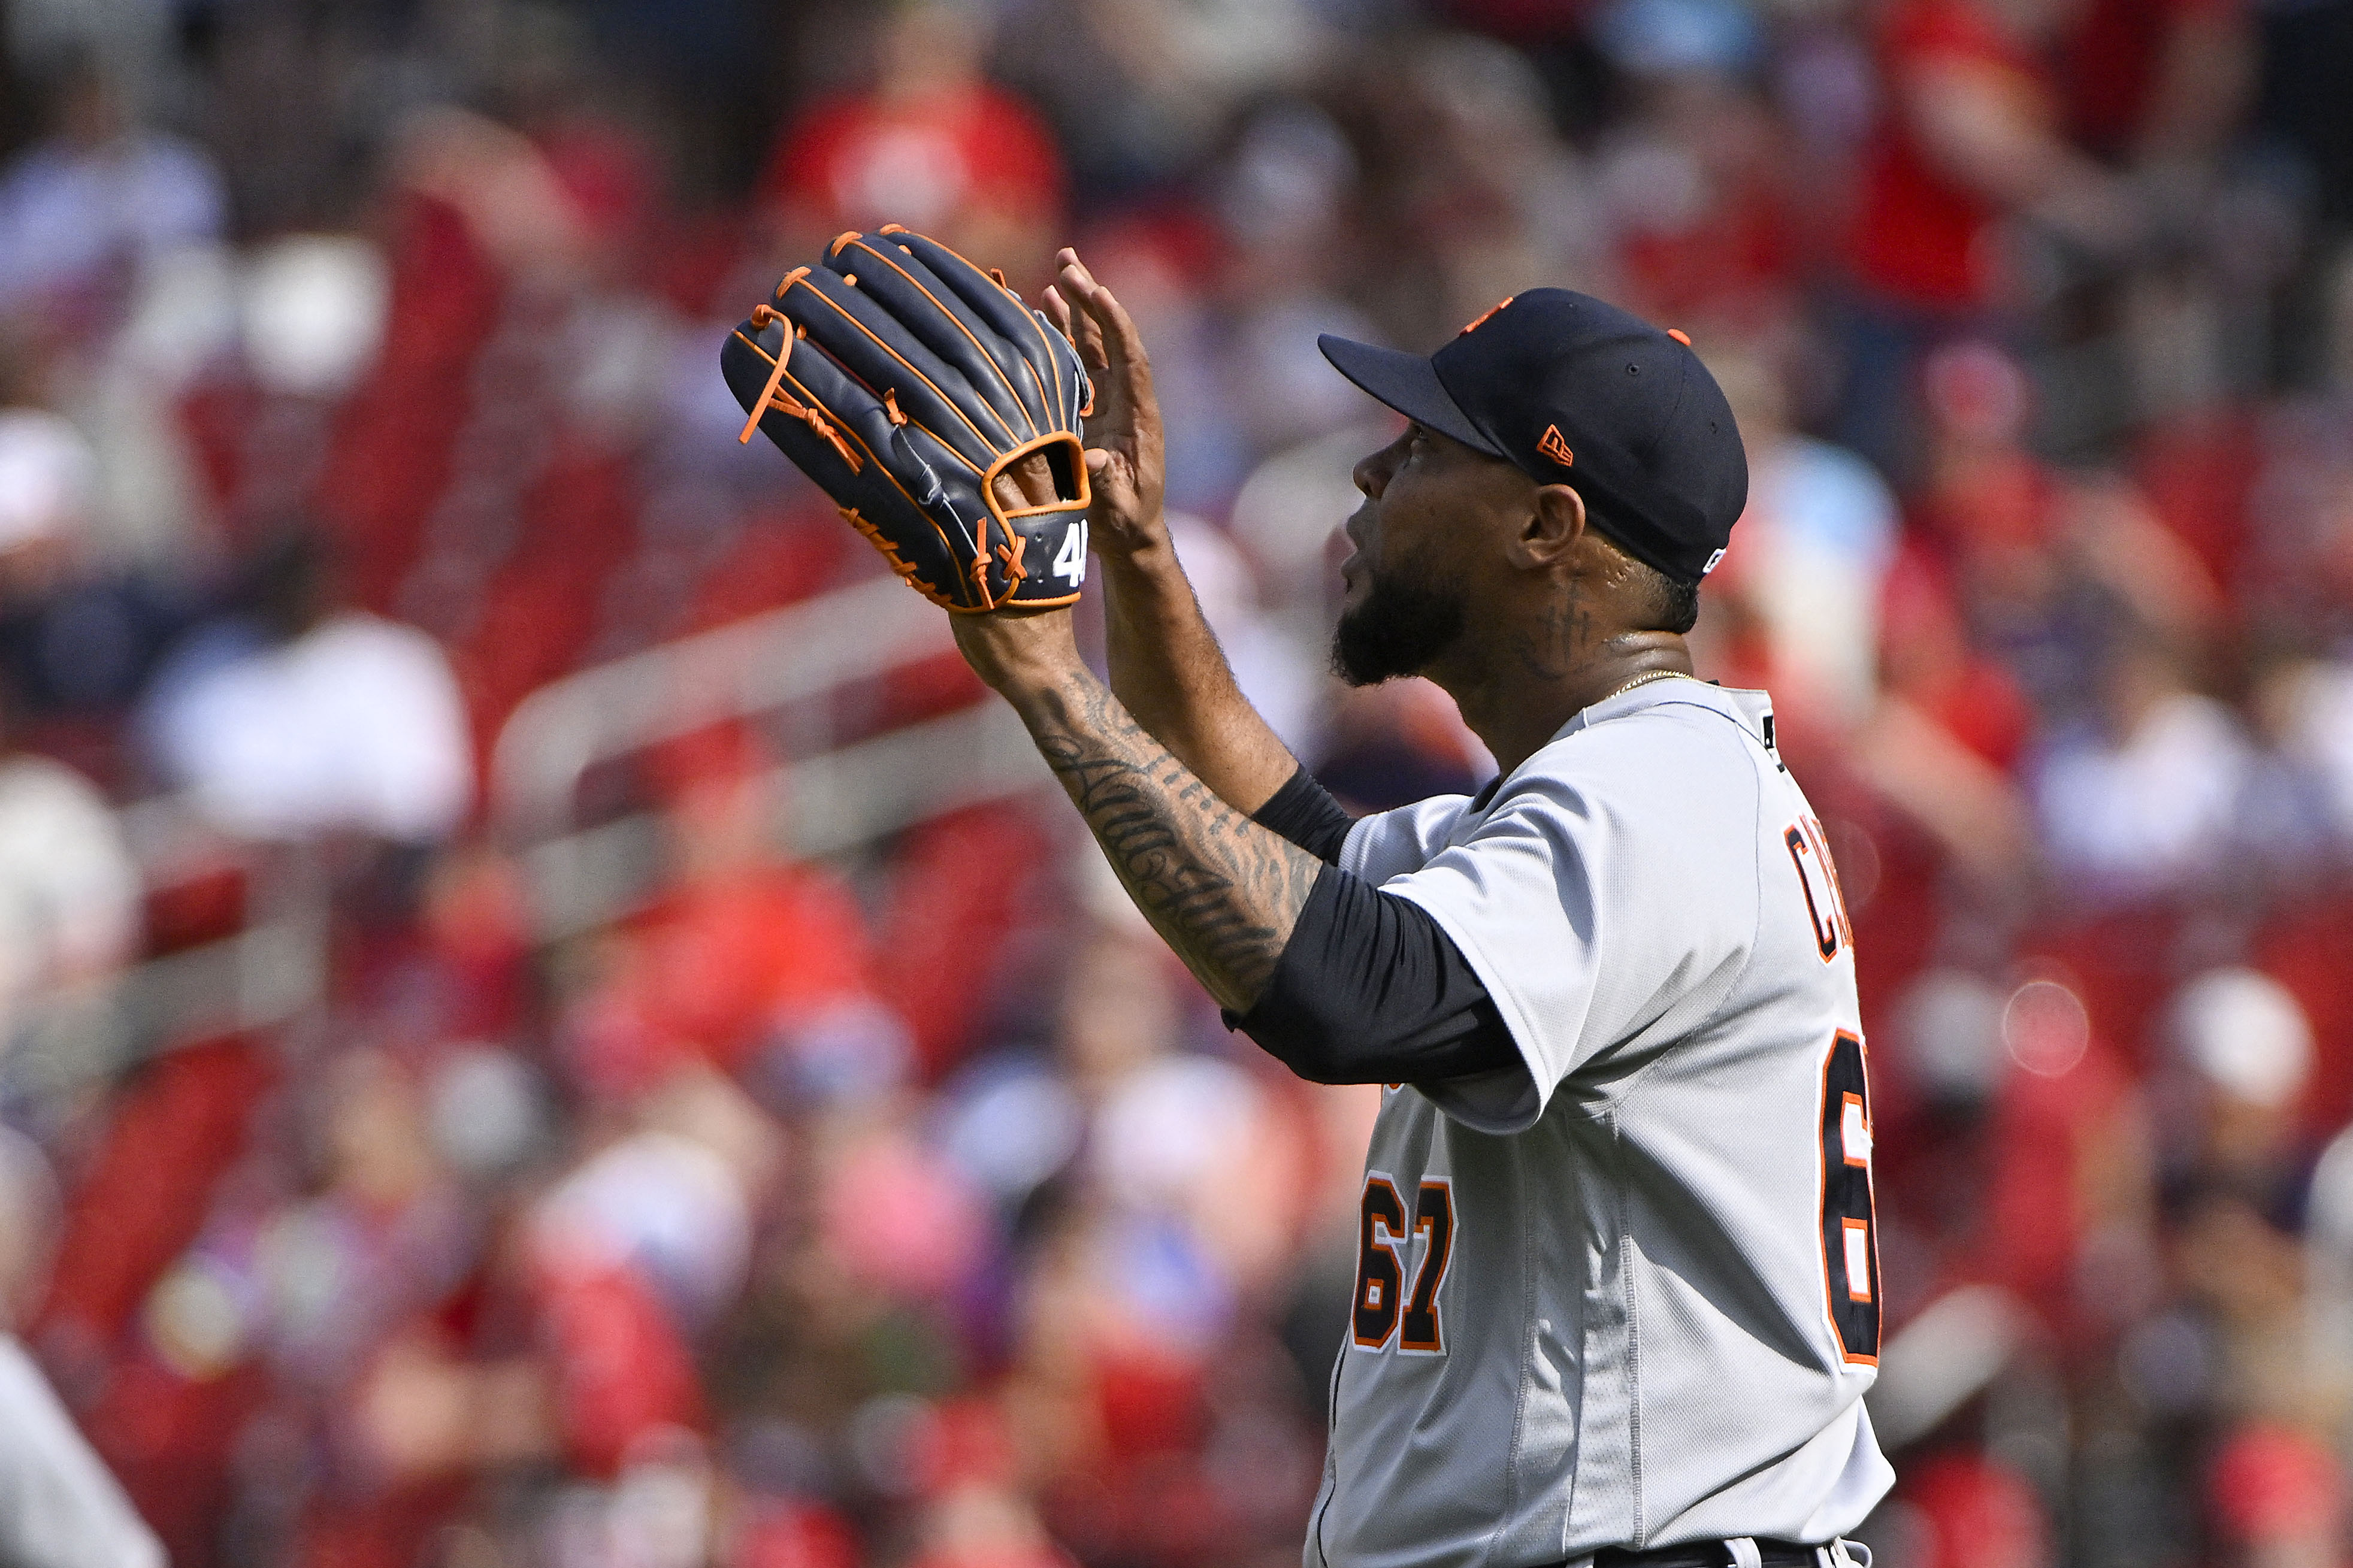 Tigers streak extends to five as Baddoo hits 10th inning double to top  Cardinals